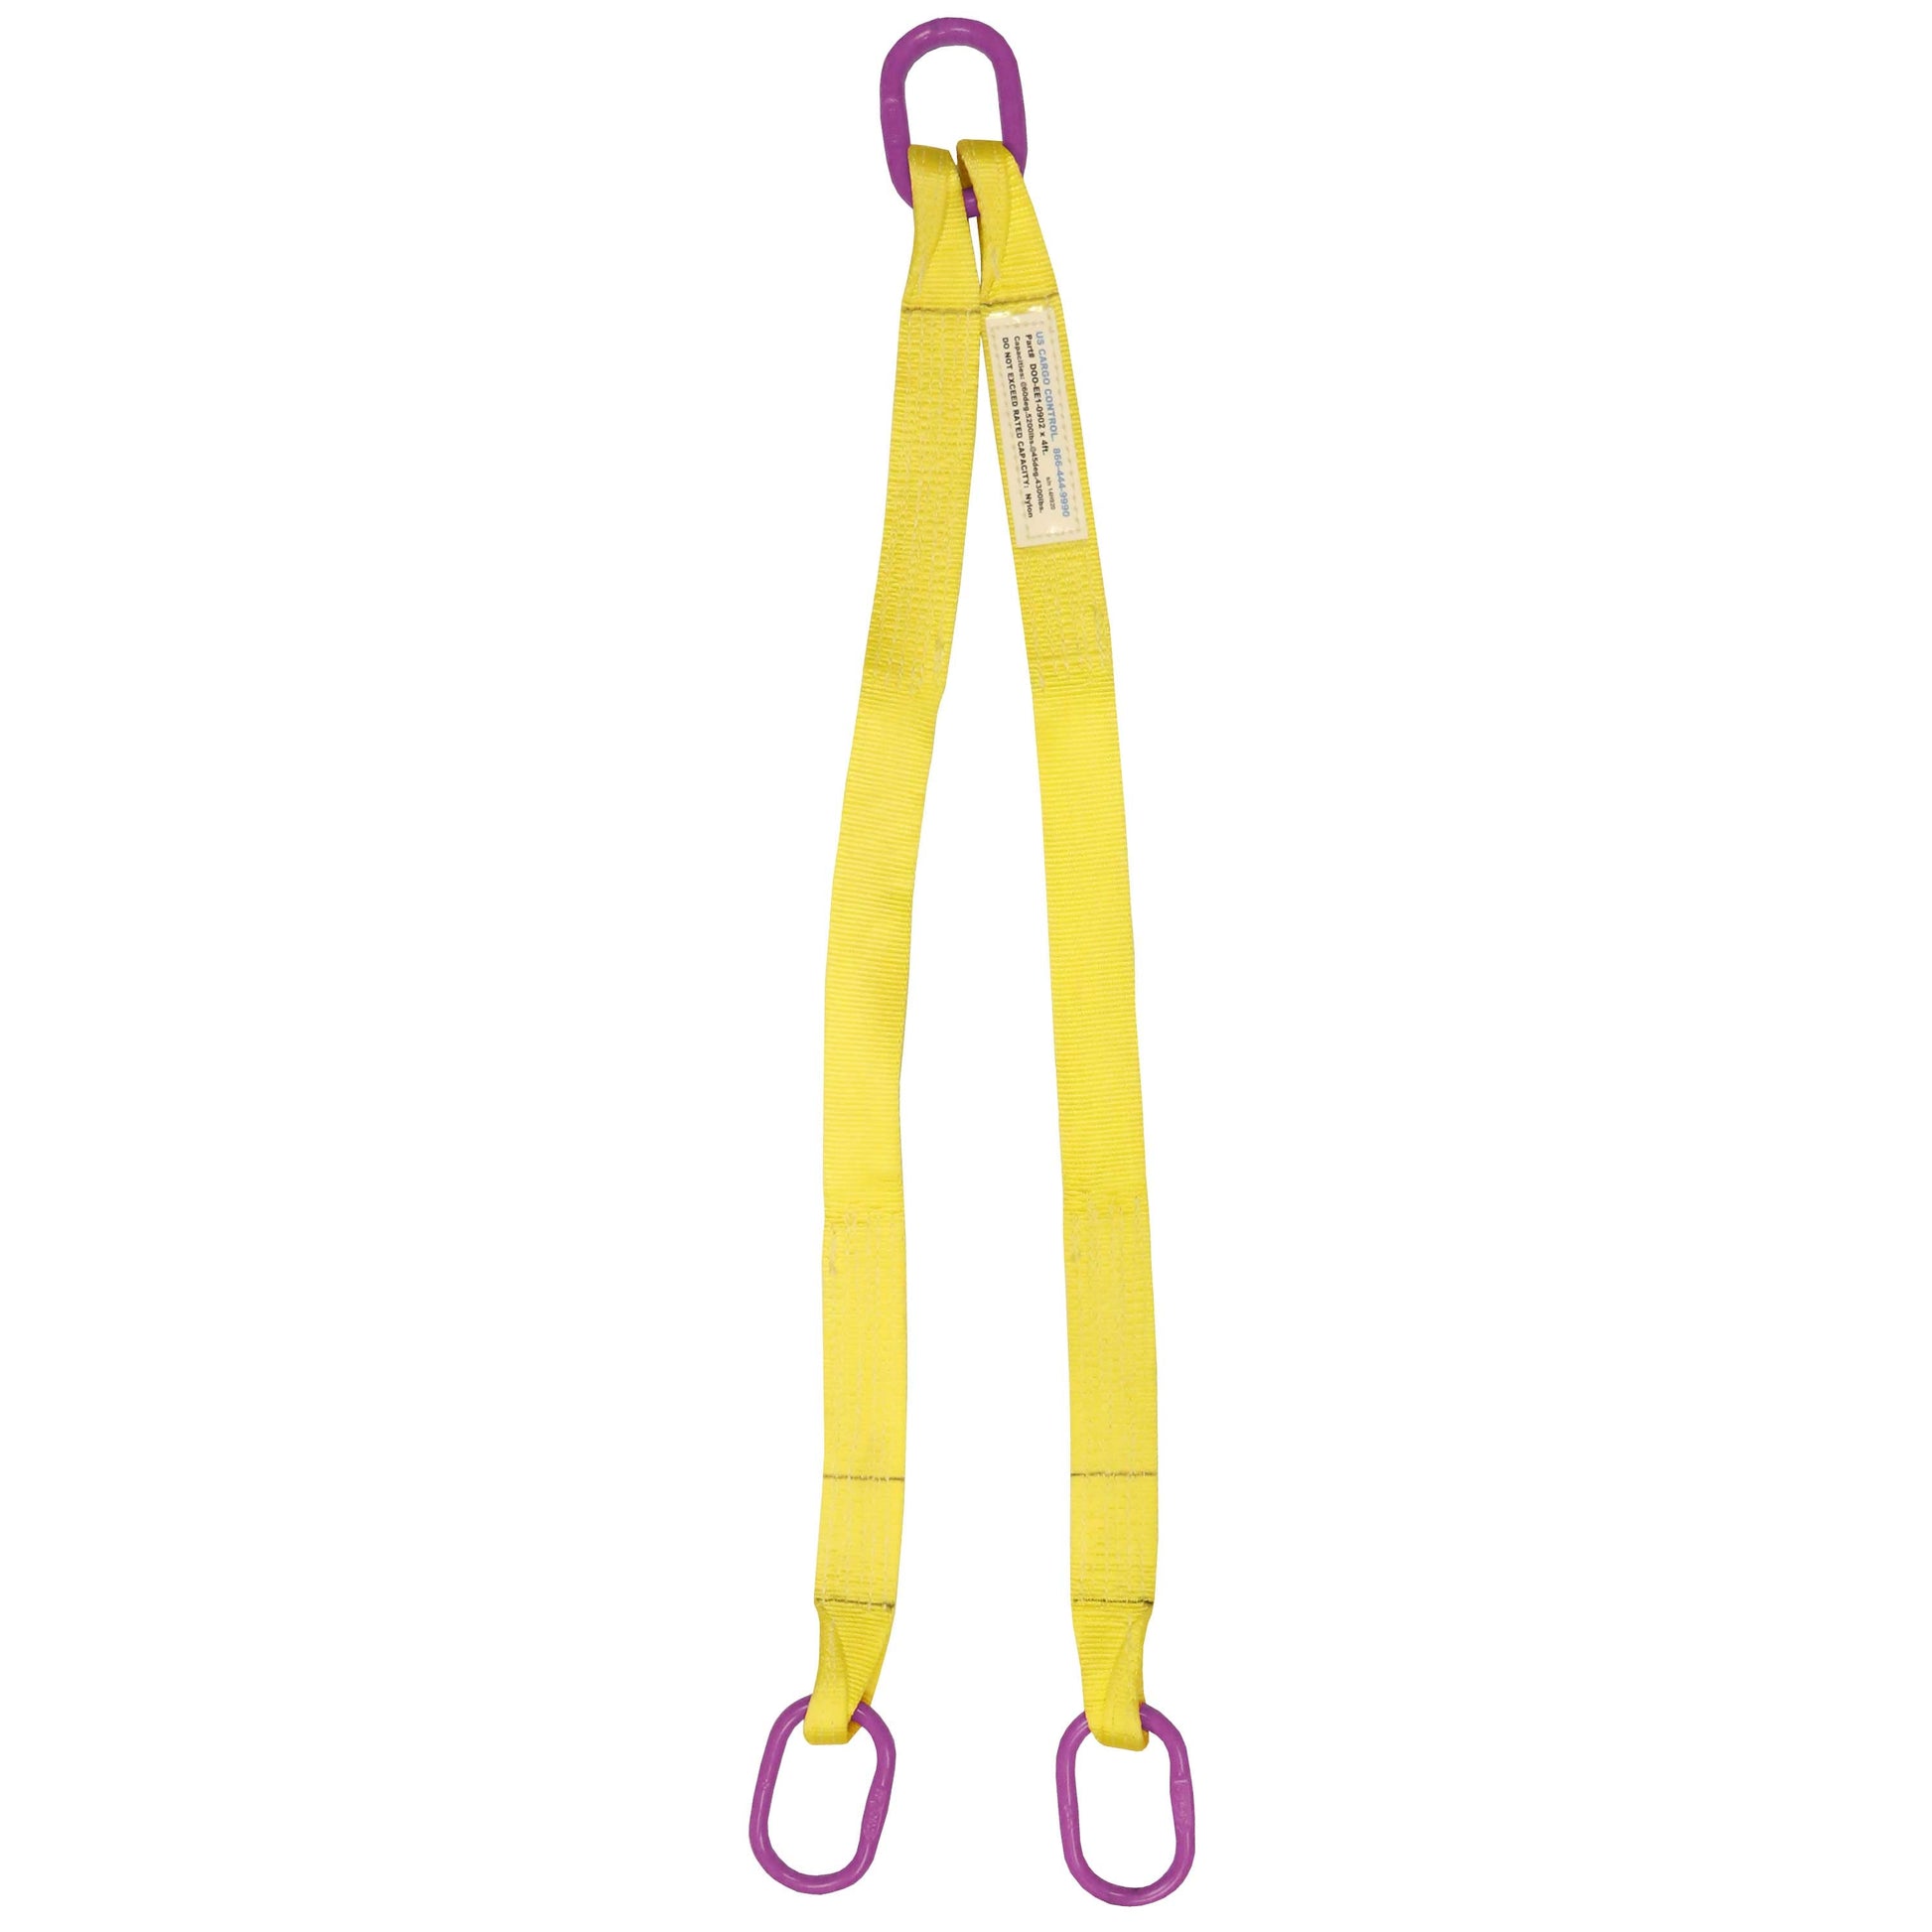 2 inchx3 foot (1 ply) Double Leg Nylon Sling w Master Link Both Ends image